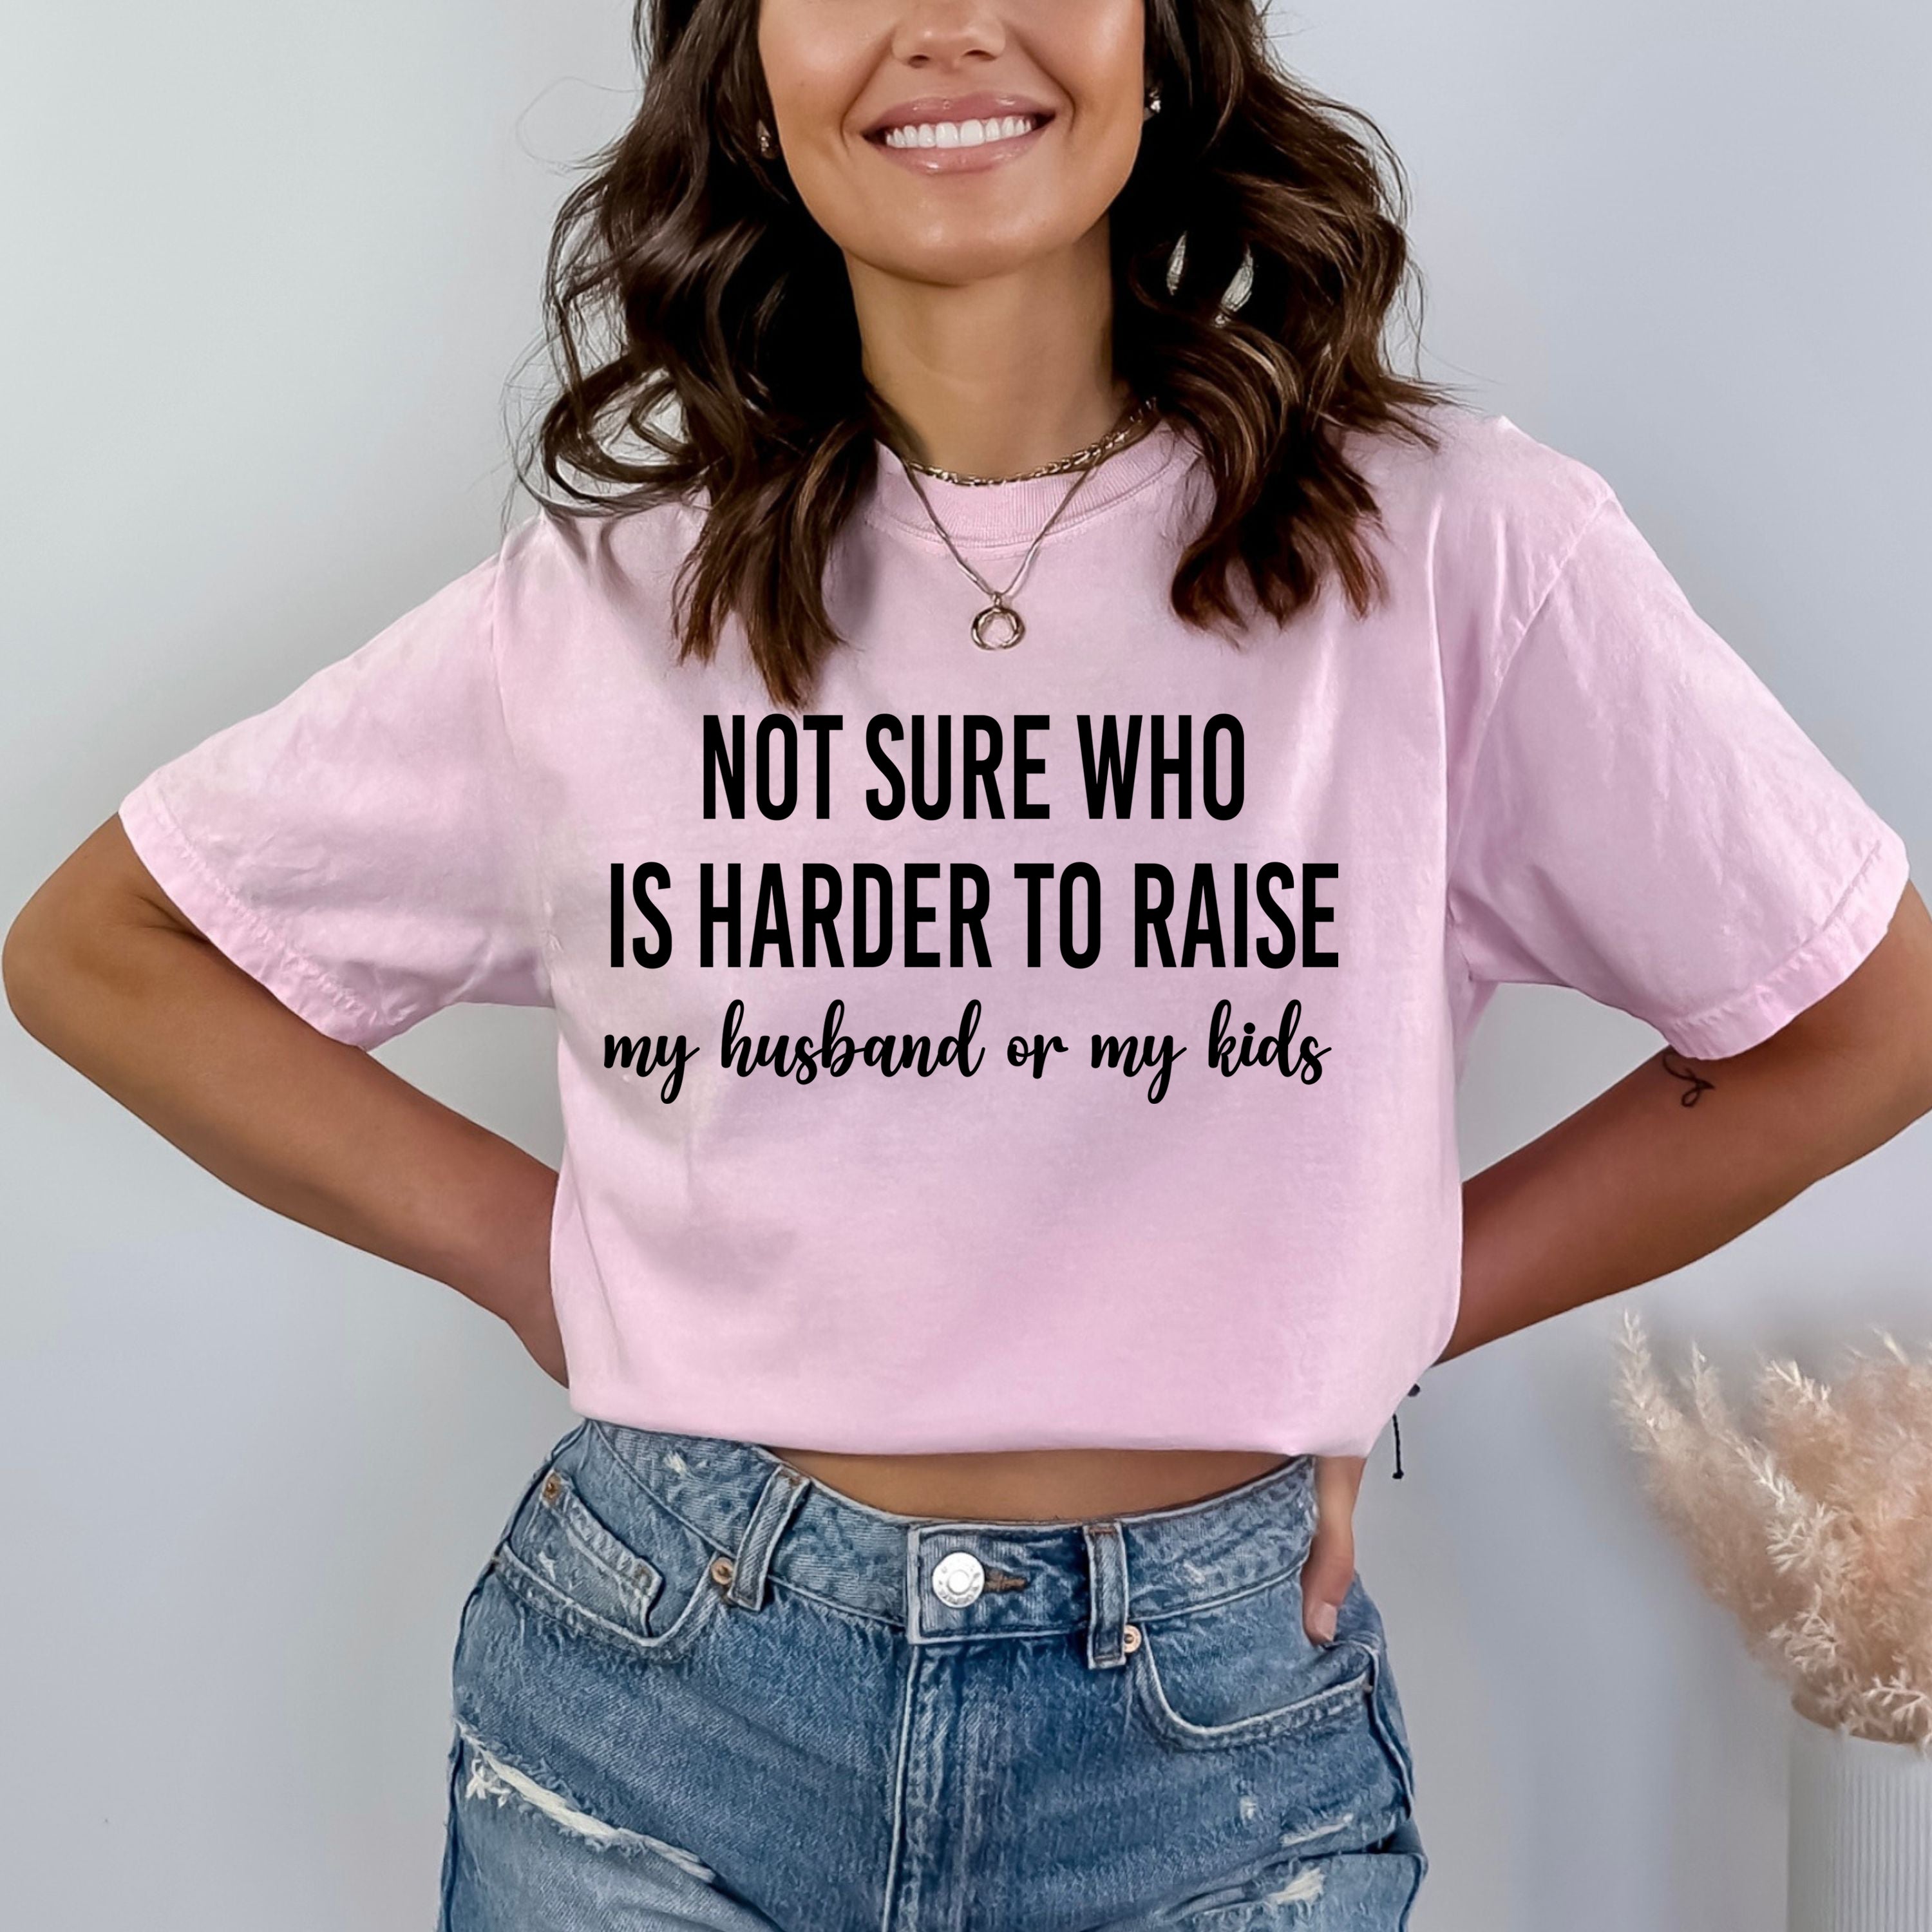 Not Sure Who Is Harder To Raise - Bella Canvas